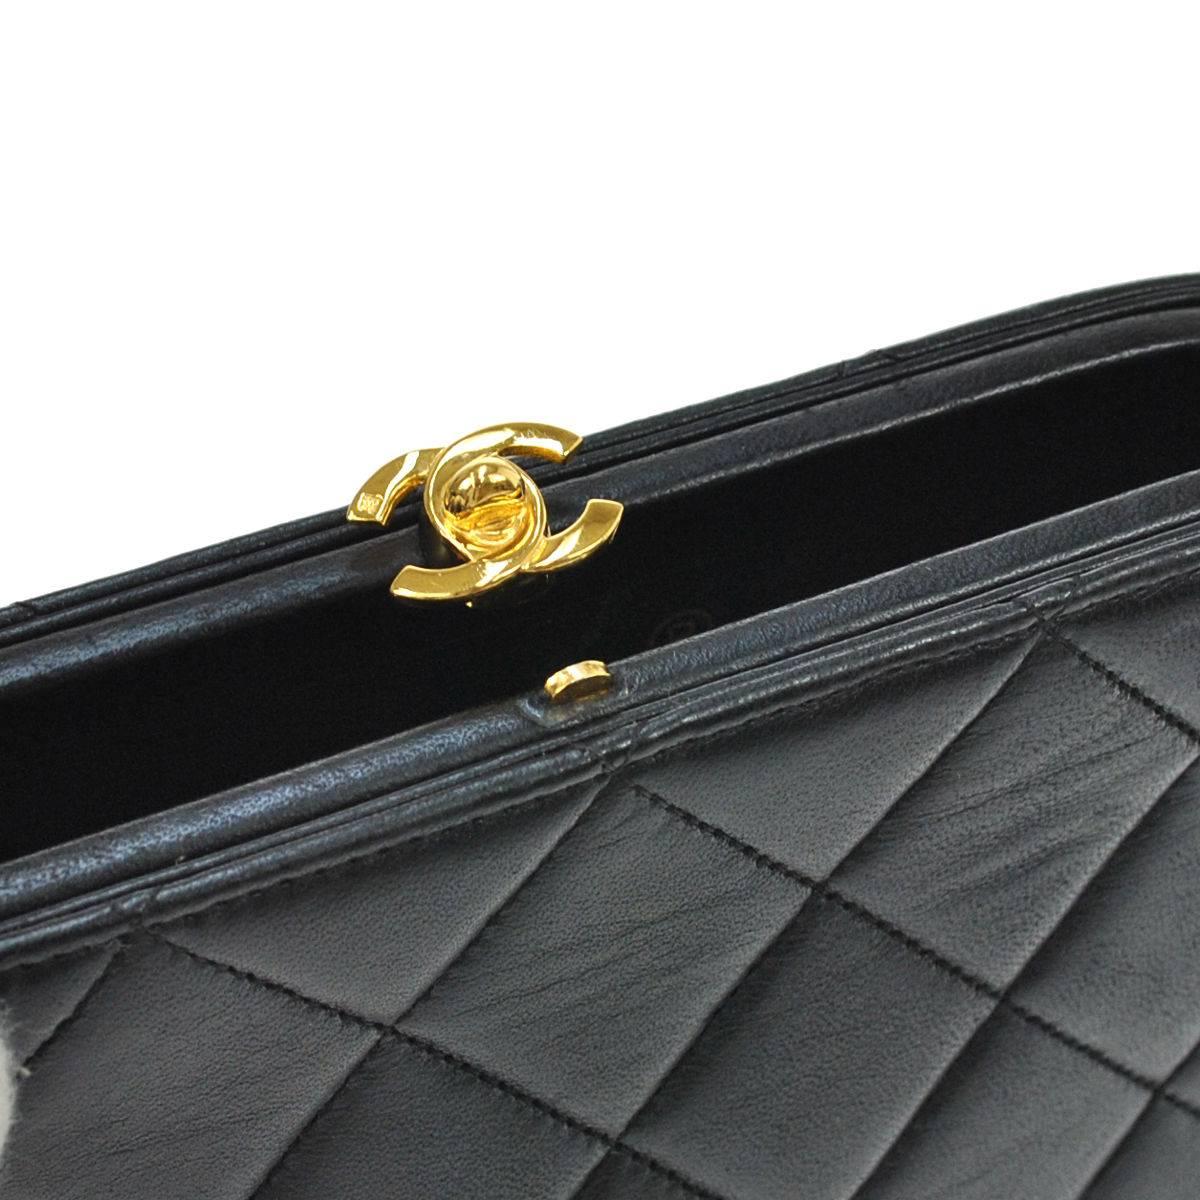 CURATOR'S NOTES

Chanel Vintage Caviar Leather Kisslock Evening Bag 

Caviar
Gold tone hardware
Kisslock closure
Date code 4188180
Made in France
Shoulder strap drop 19"
Measures 9.5" W x 6.5" H x 2.5" D 
Includes original Chanel